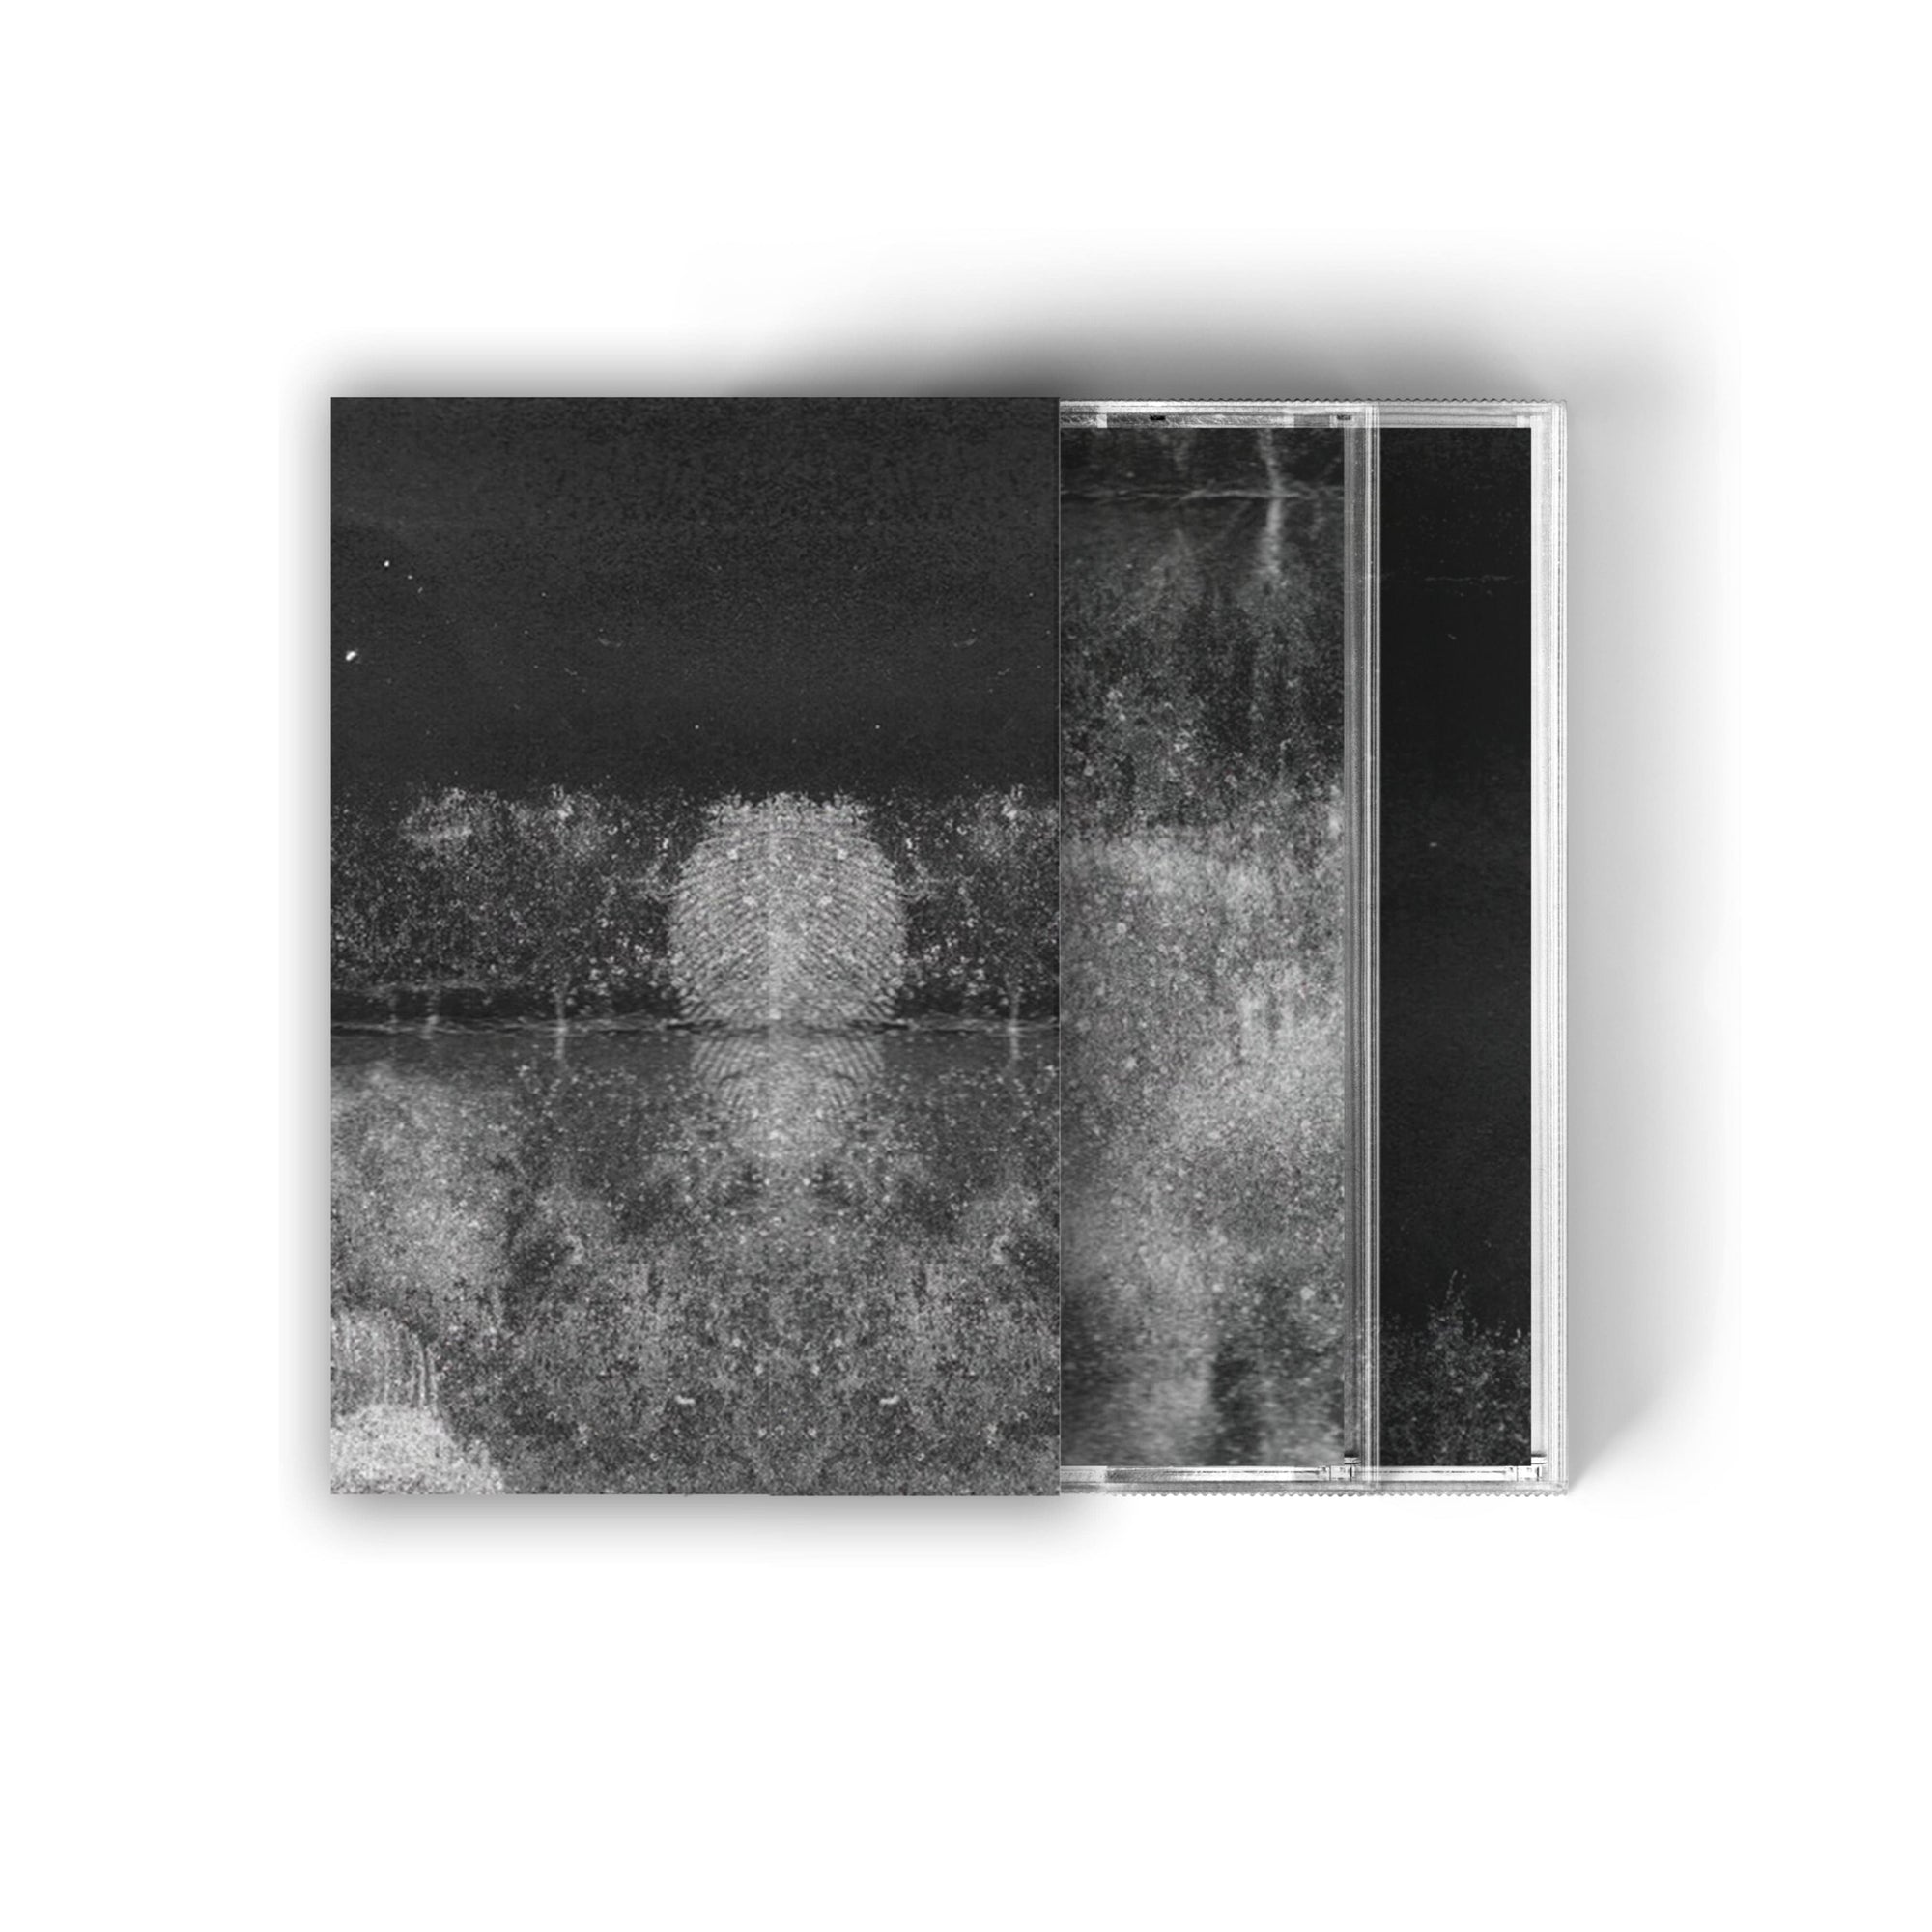 The Flenser Tapes Planning for Burial "Matawan - Collected Works 2010-2014" Tape Set